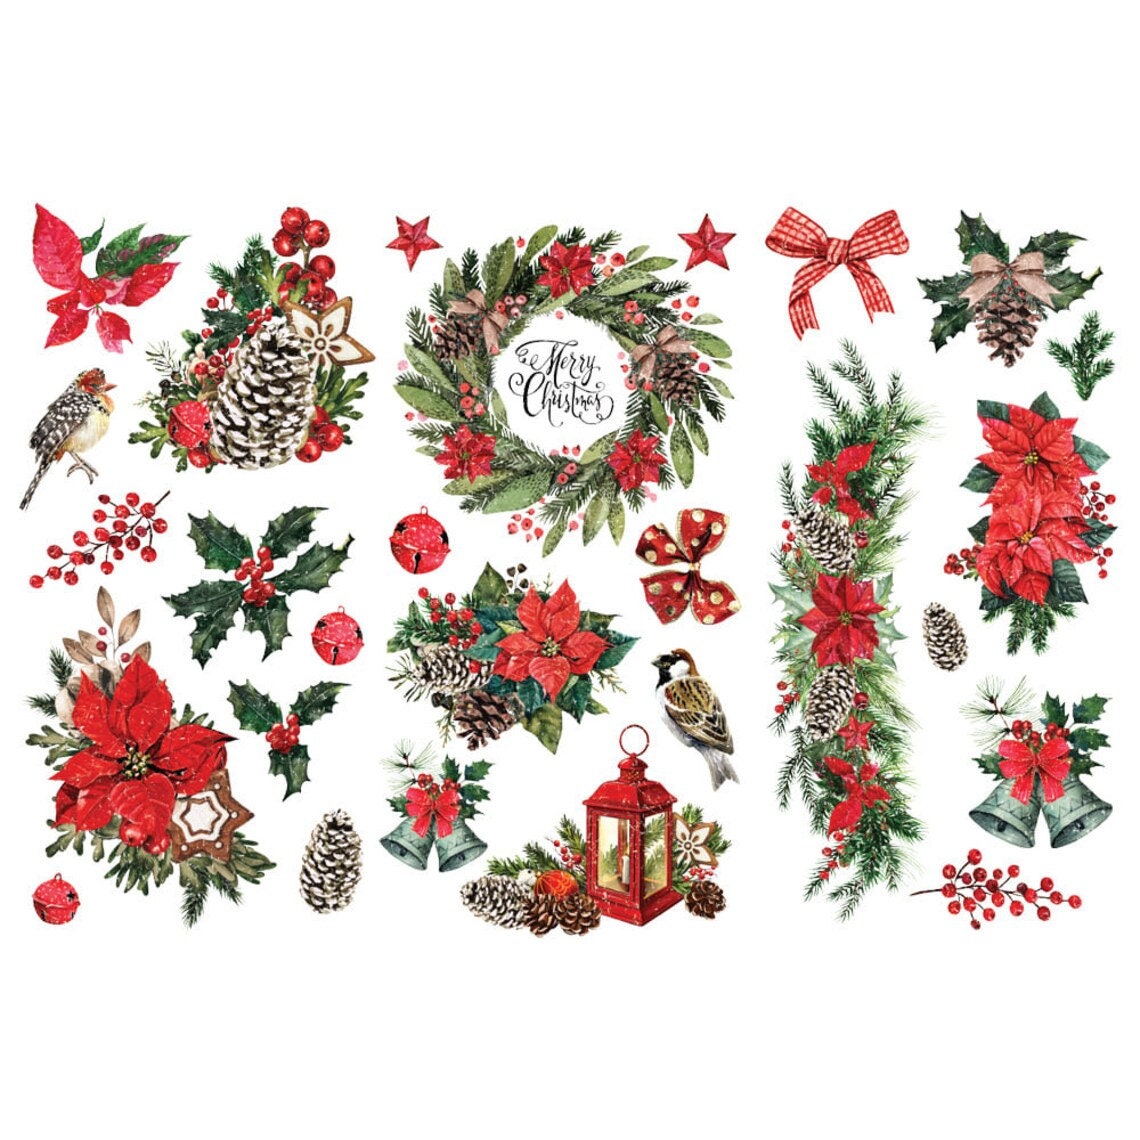 Classic Christmas transfer by Redesign with Prima 6"x12" - Same Day Shipping - Rub on transfers - Decor Transfer - Small Furniture Transfer - belleandbeau850